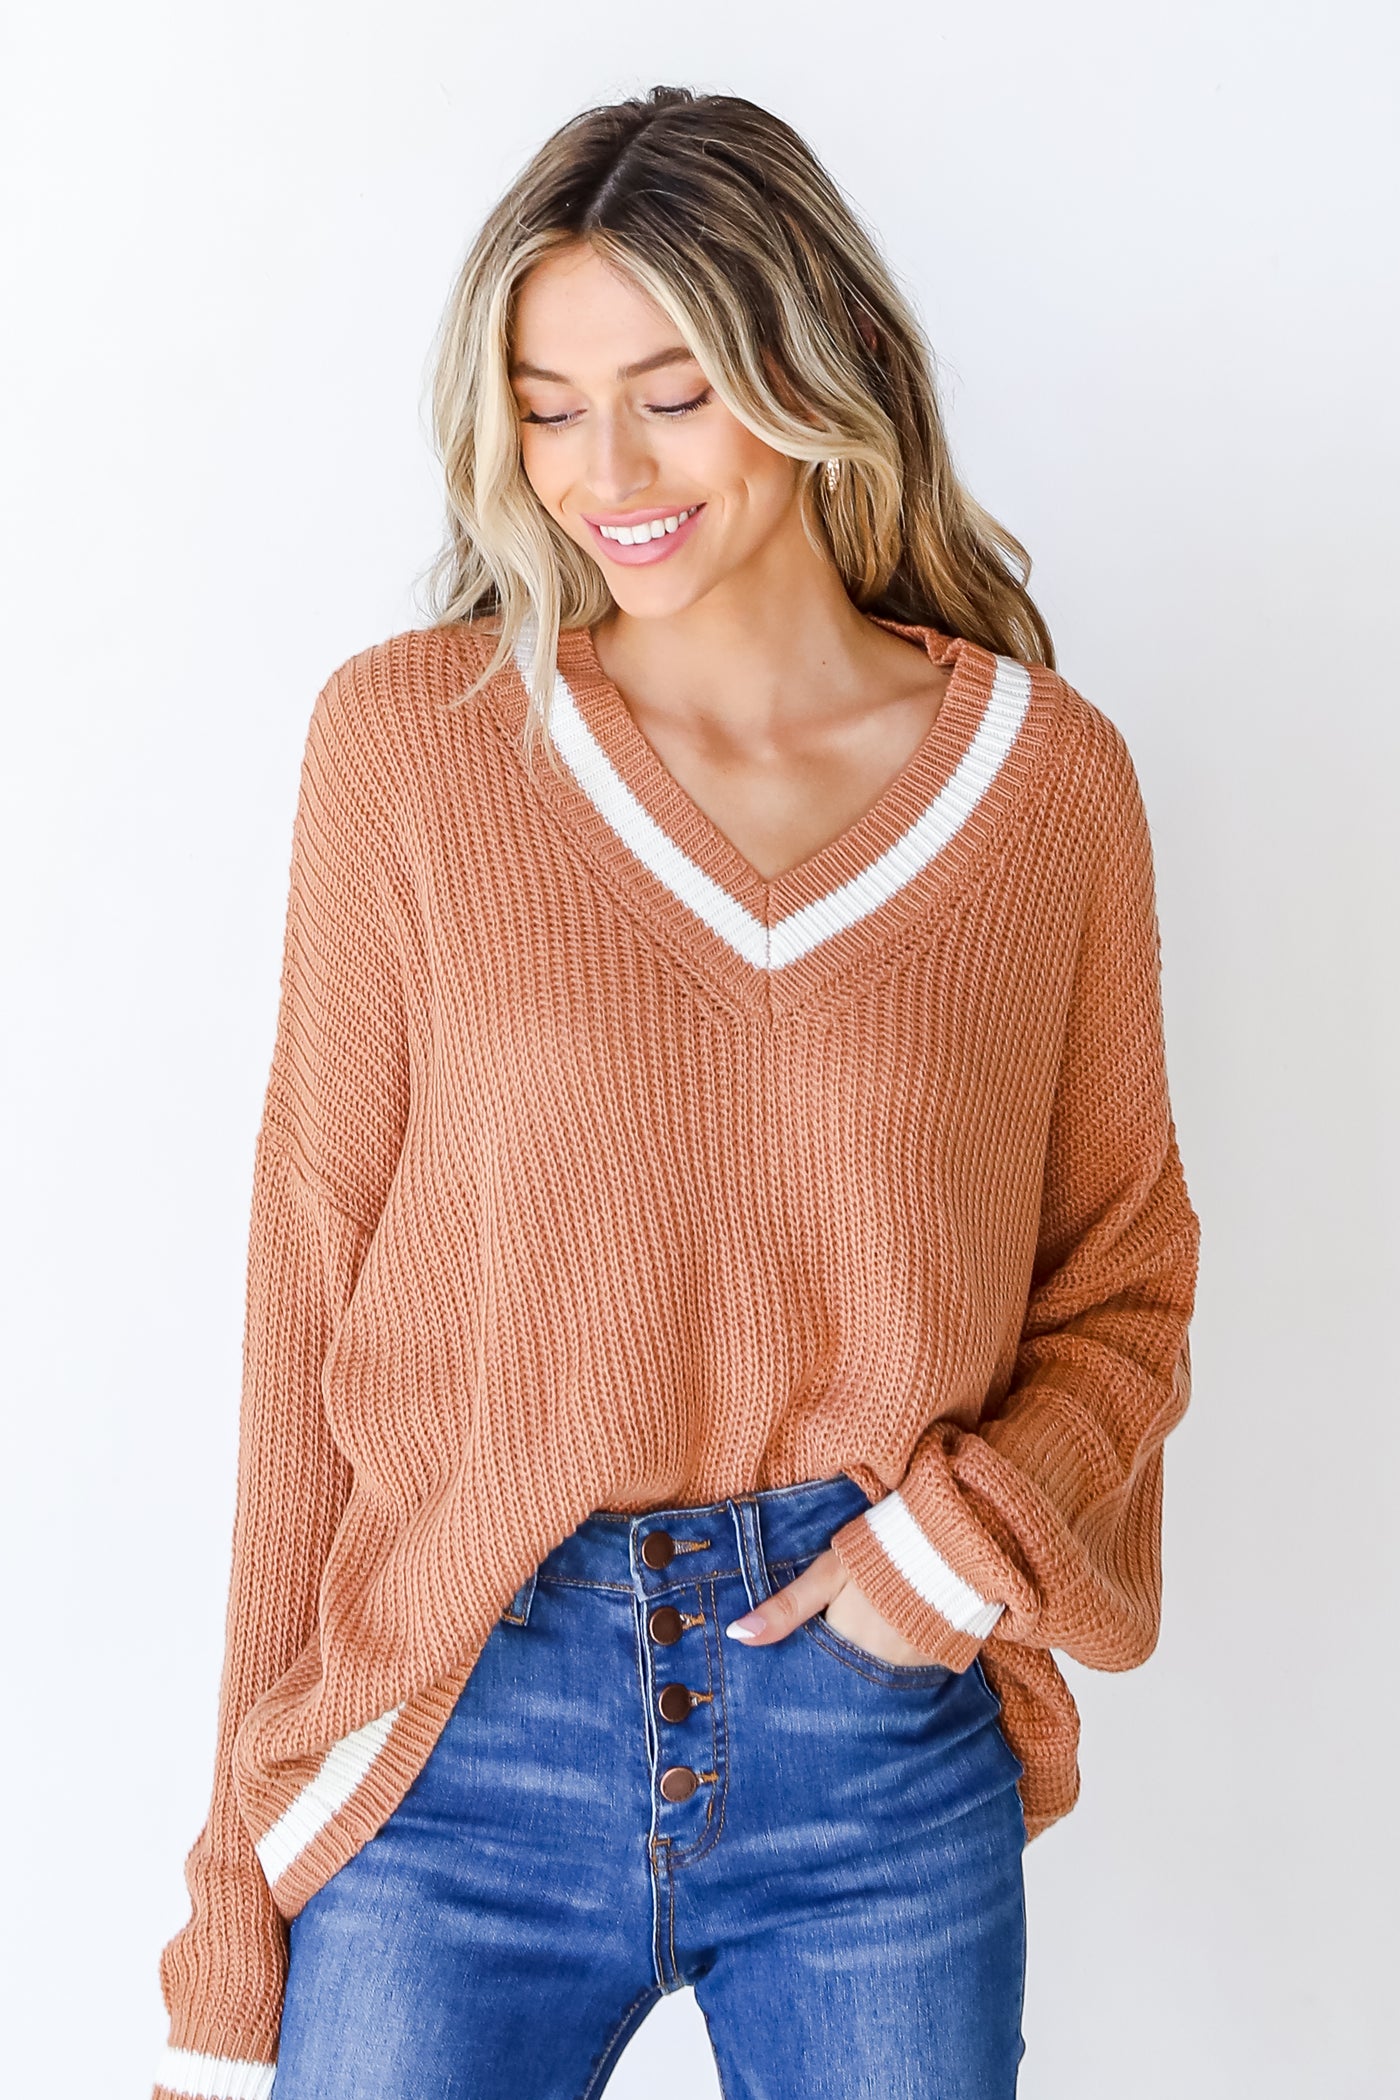 Sweater front view